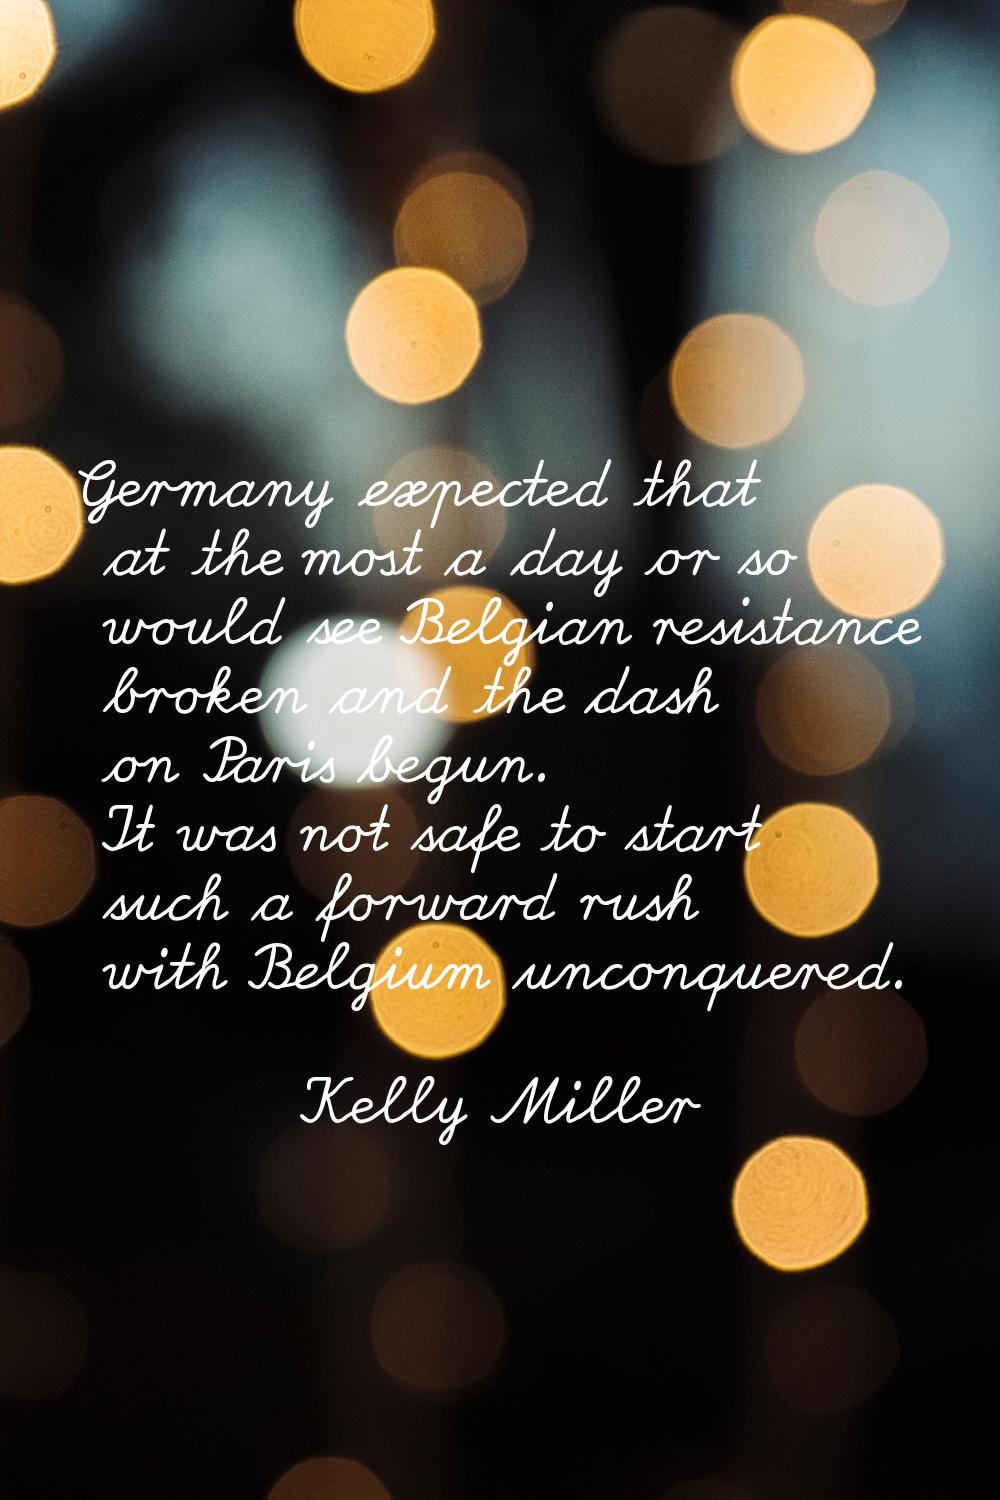 Germany expected that at the most a day or so would see Belgian resistance broken and the dash on P